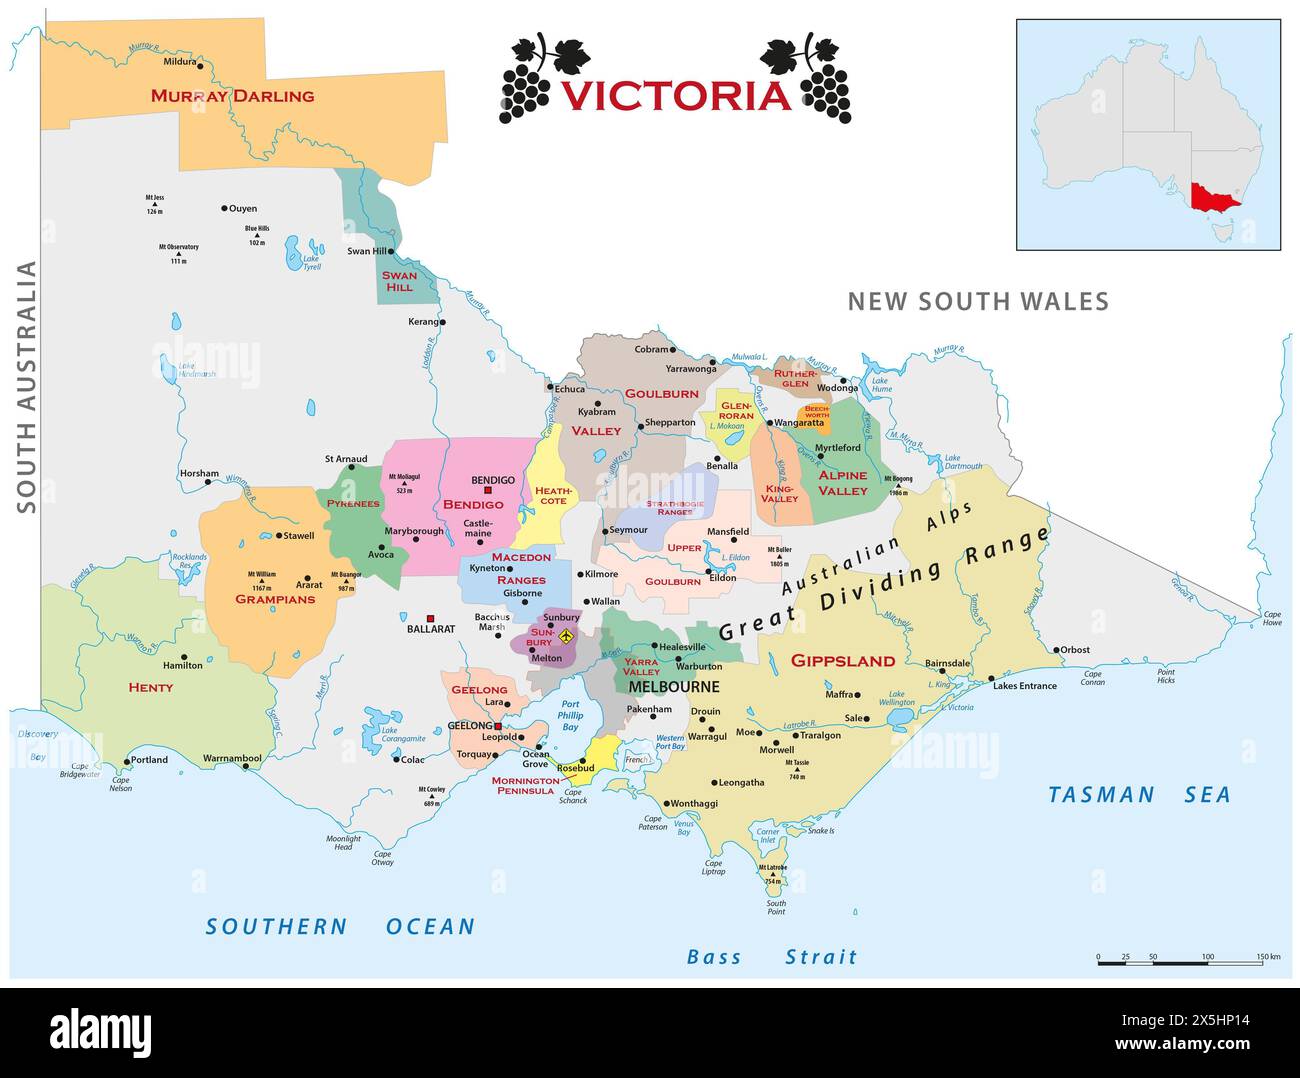 Vector map of the wine growing regions of the Australian state of Victoria Stock Photo